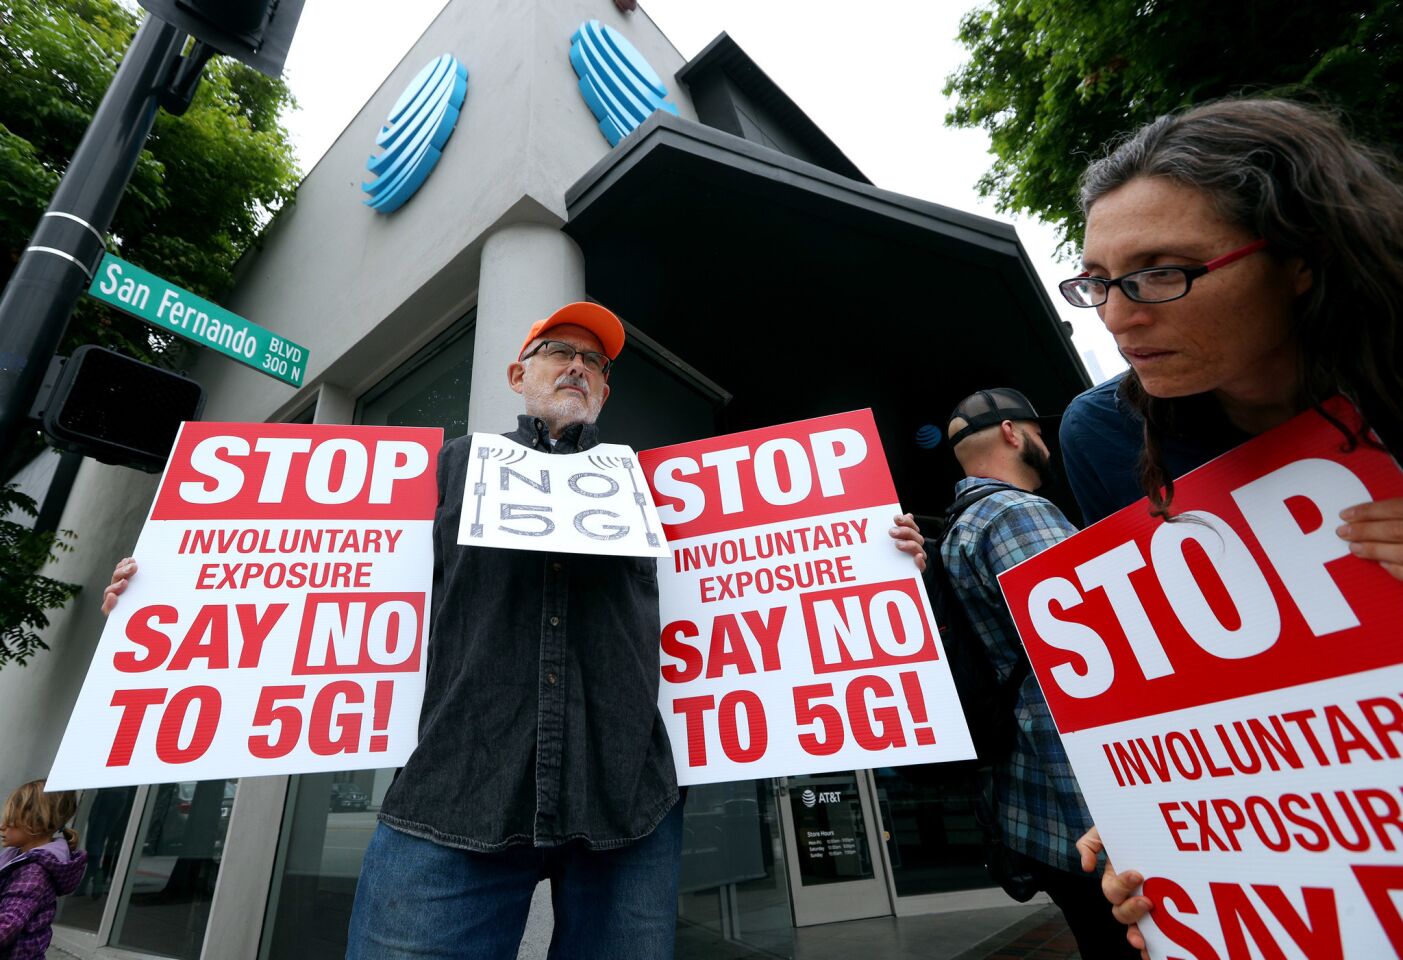 La Crescenta resident Ted Baumgart, left, and Karen Felzer, right, of Monrovia, hold signs against 5G outside the AT&T store on San Fernando Blvd., in Burbank on Wednesday, May 15, 2019.